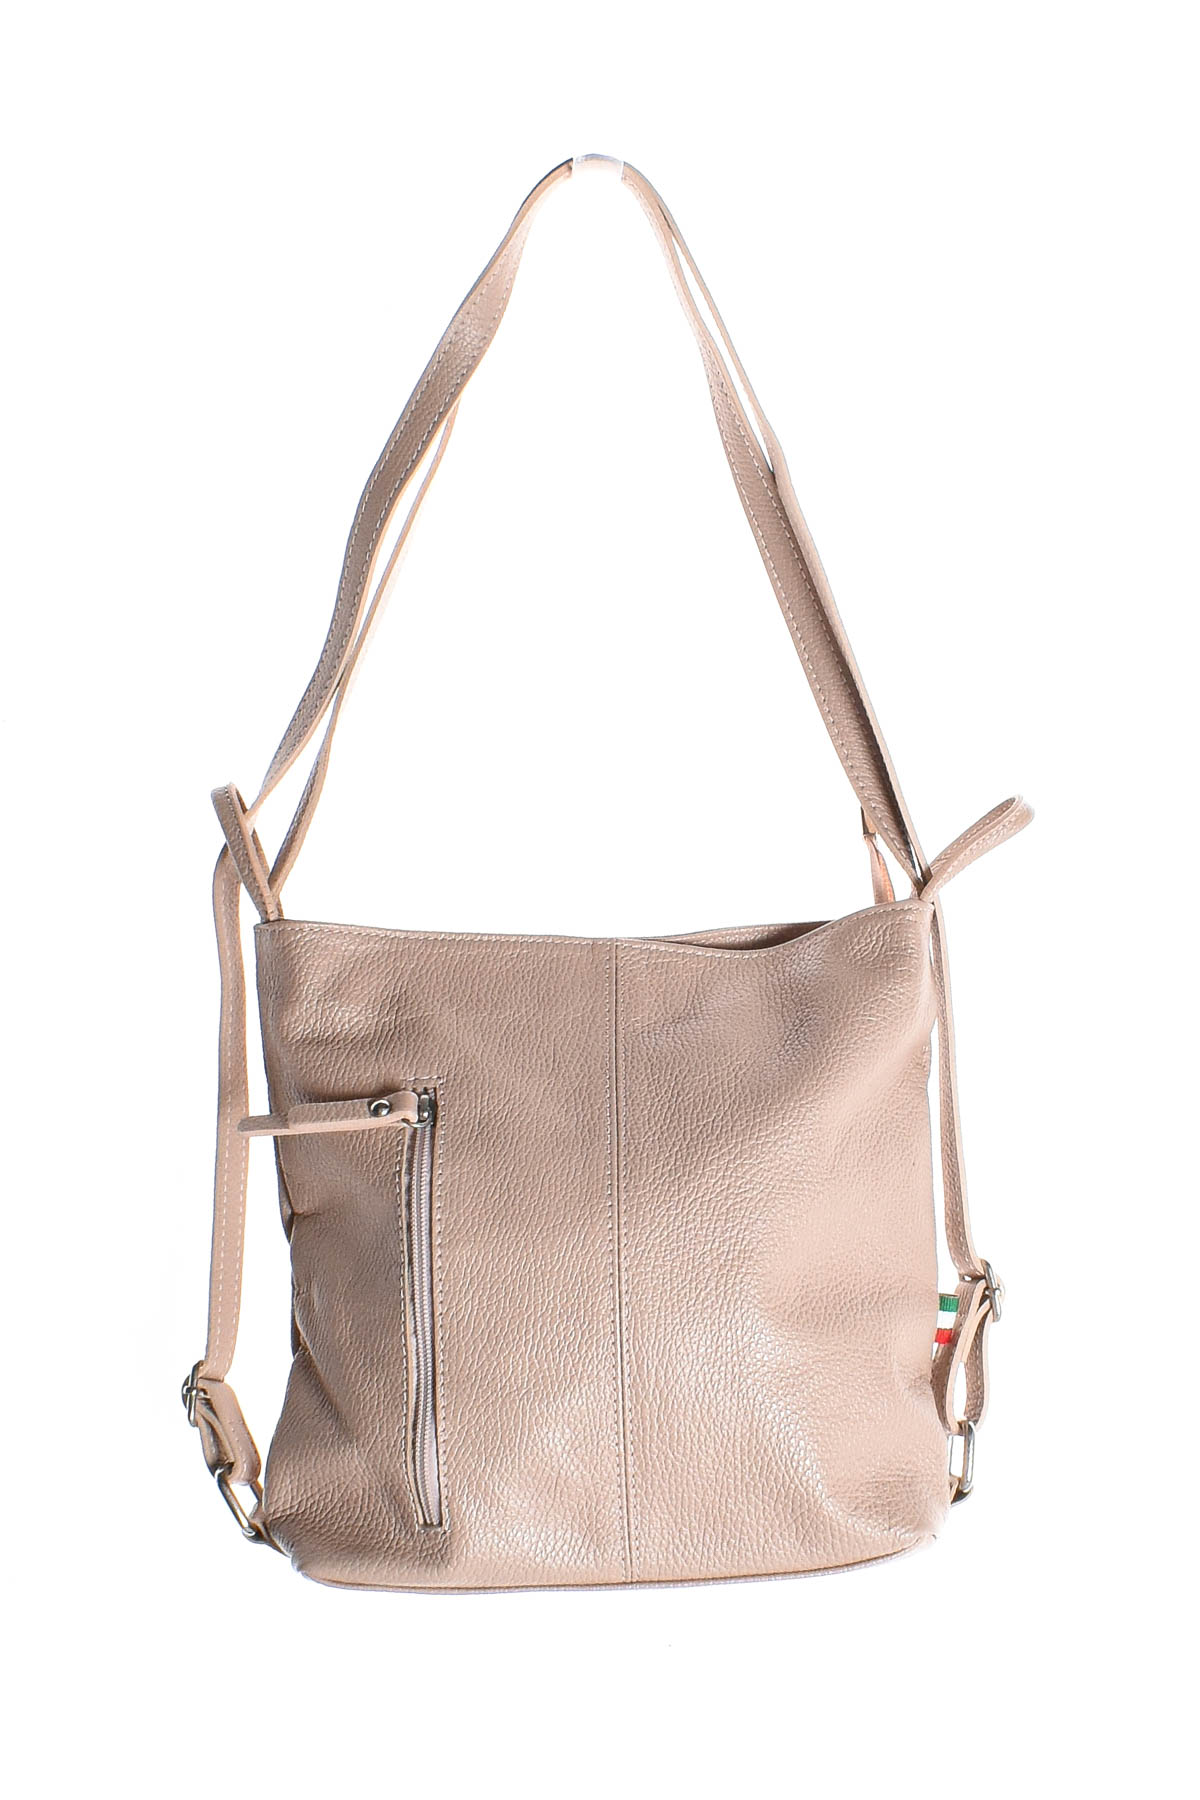 Women's bag - Made in Italy - 0